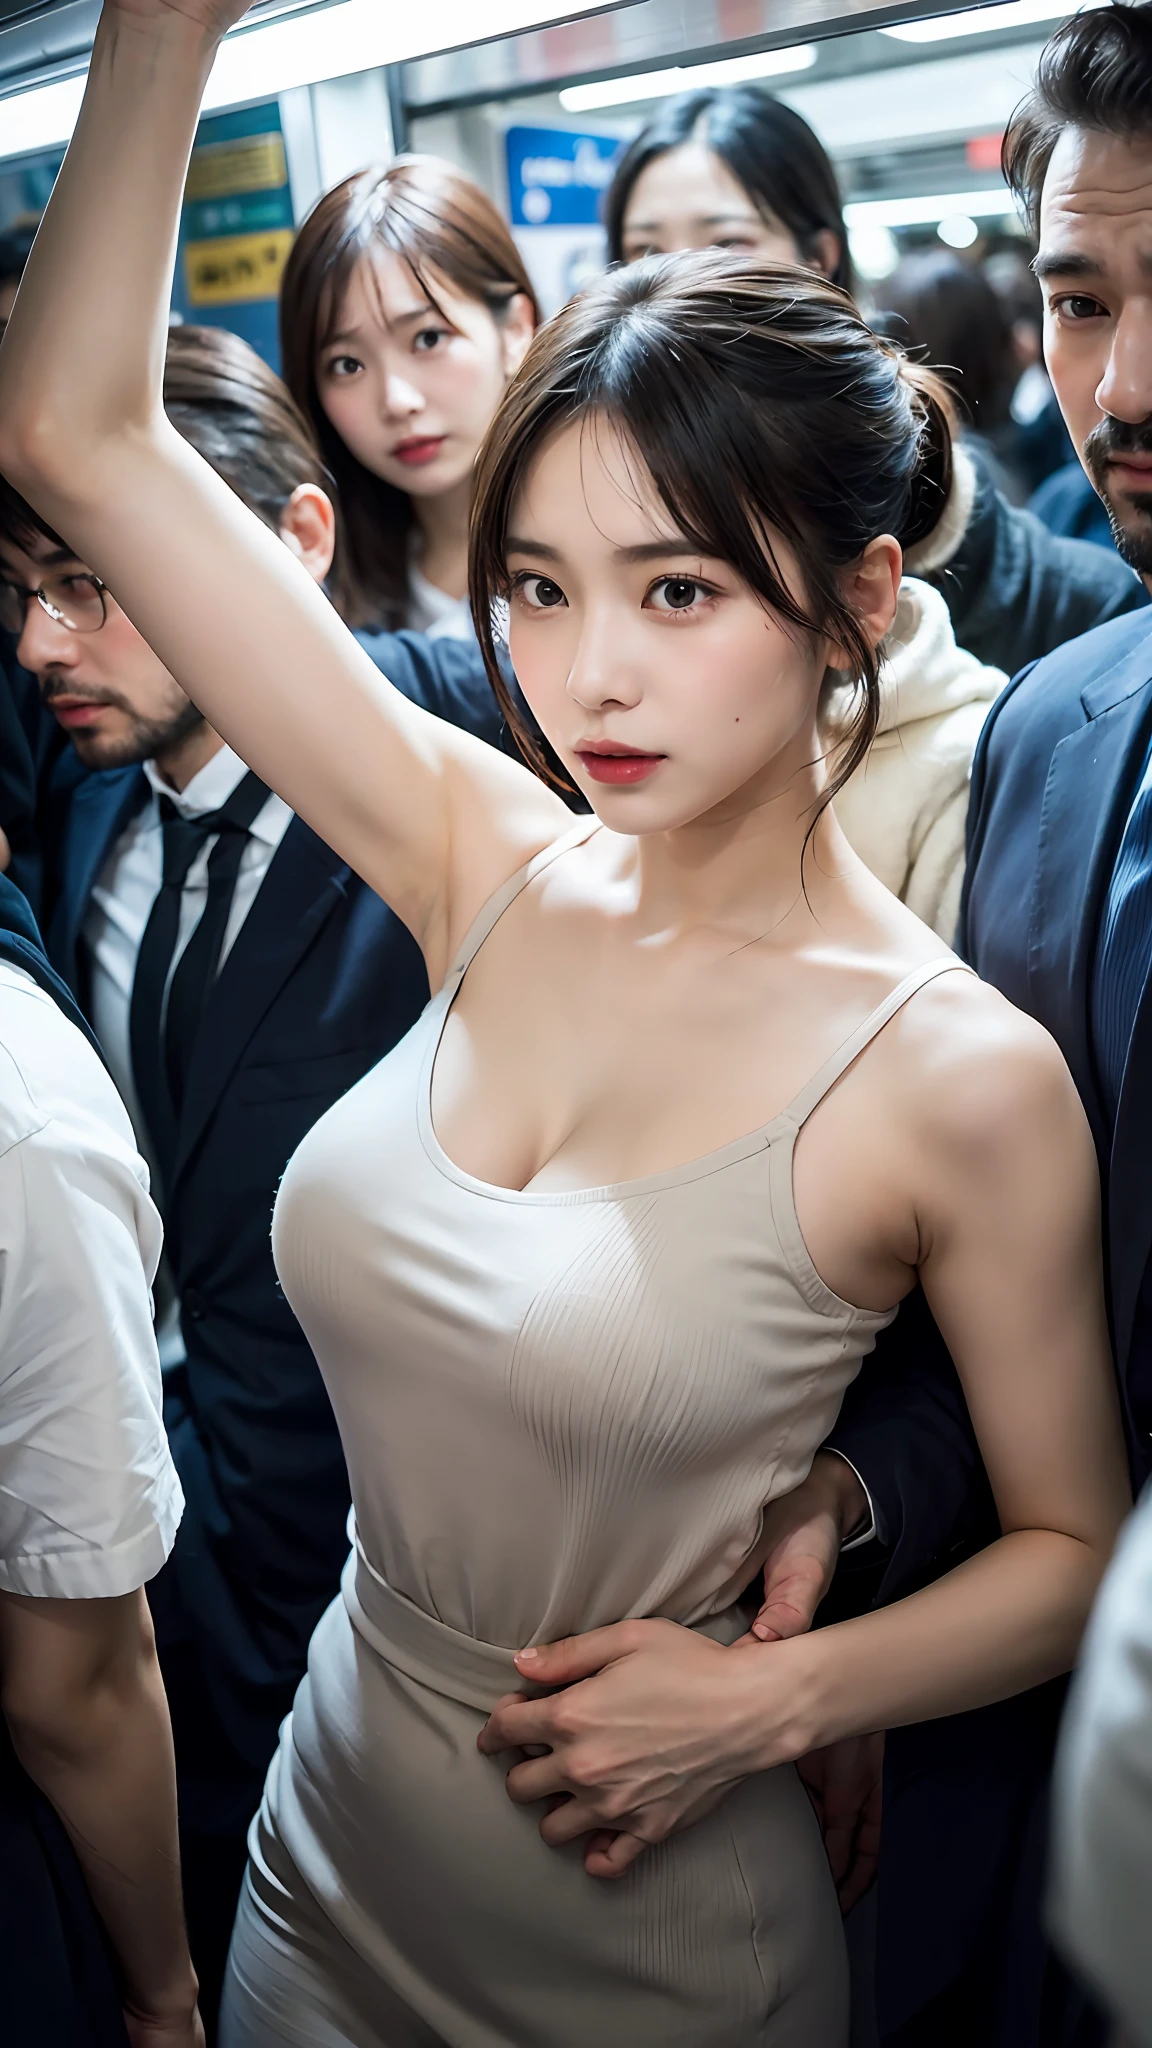 (Best Quality, 8k, 32k, Masterpiece, UHD: 1.2), Depth of Field: 1.2, Black Smoke: 1.1, Cute Japan Woman Pictures, Small Women, 20 Years Old, Beautiful and Perfect Face, Short Hair, Ponytail, Brown Short Hair, Beauty Face, Slender: 1.2, Small Breasts: 1.2, Complex Details, Cinematic Feeling,Shy, Panic face, mouth open and pleasant-looking face, cowboy shot, composition with no face visible except for women, looking at breasts, embarrassed: 1.2, crowded train: 1.37, crowded: 1.37, emphasis on the armpits, long dress, thin fabric, thong, mekosuji, crotch open, pubic hair is very much protruding, clothes with exposed breasts, exposed breasts from the side, exposed armpits, exposed navel, (molested, surrounded by tall men on a crowded train, body in close contact with men, hands put in the lower half of the body by men, undressed by men, covered lift, skirt lift: 1.1), (beautiful nipple slip: 0.9)